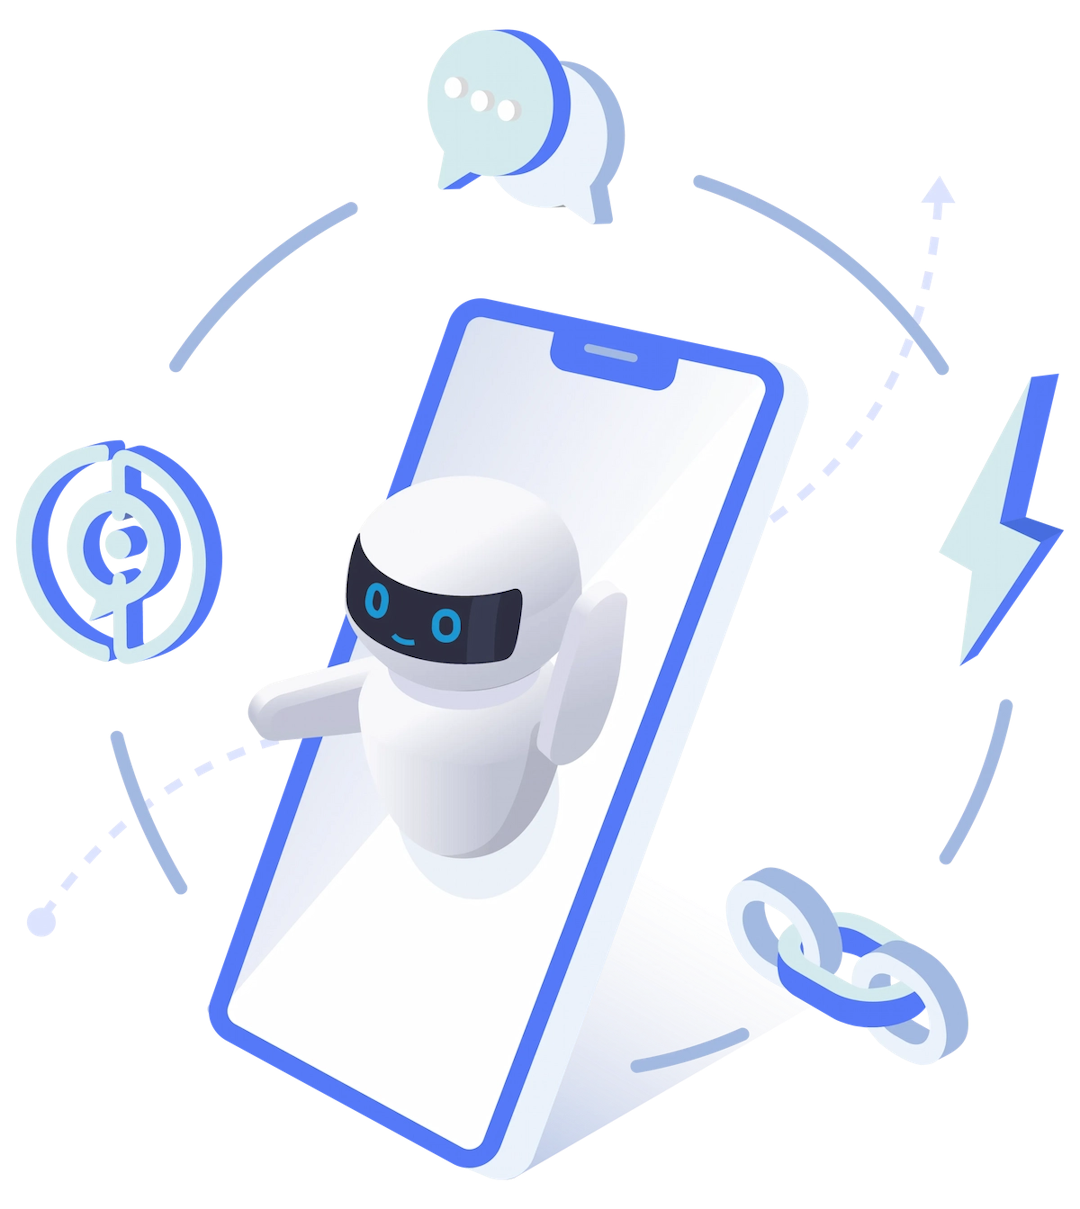 See Handle chatbot in action